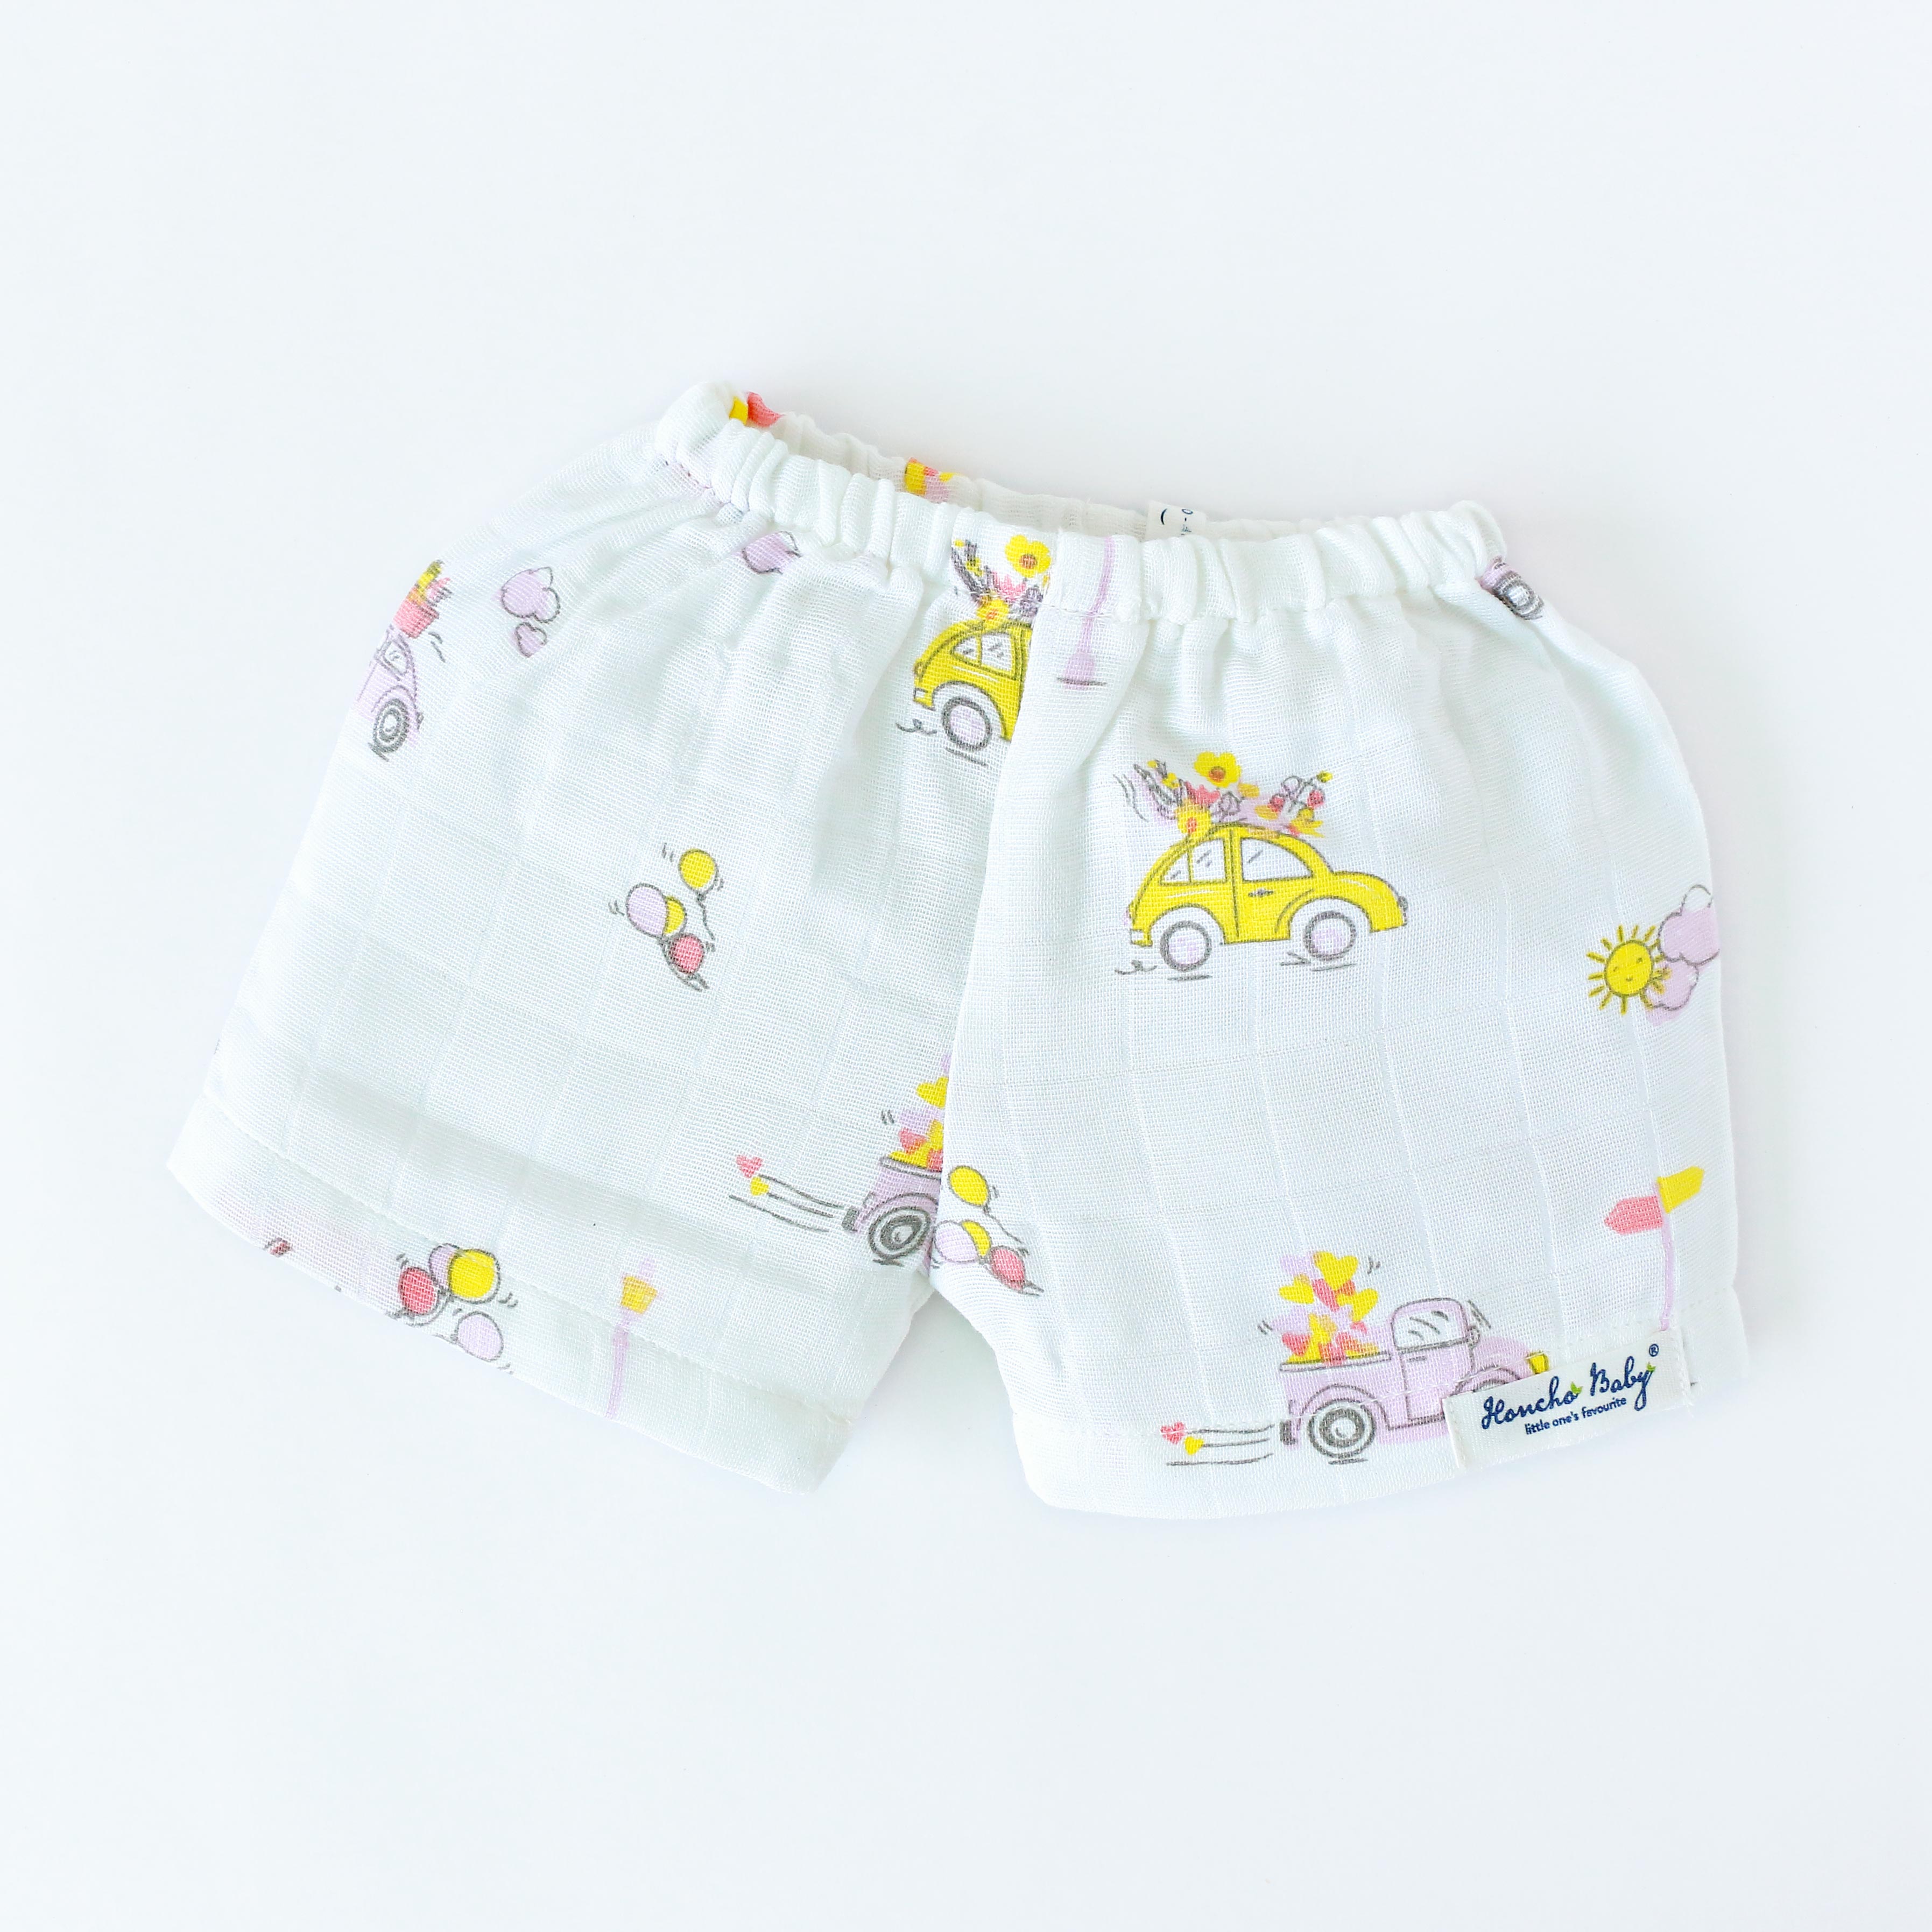 Loads of Love 2.0 - Unisex Shorts - 1 Pack ( 0 to 3 years )